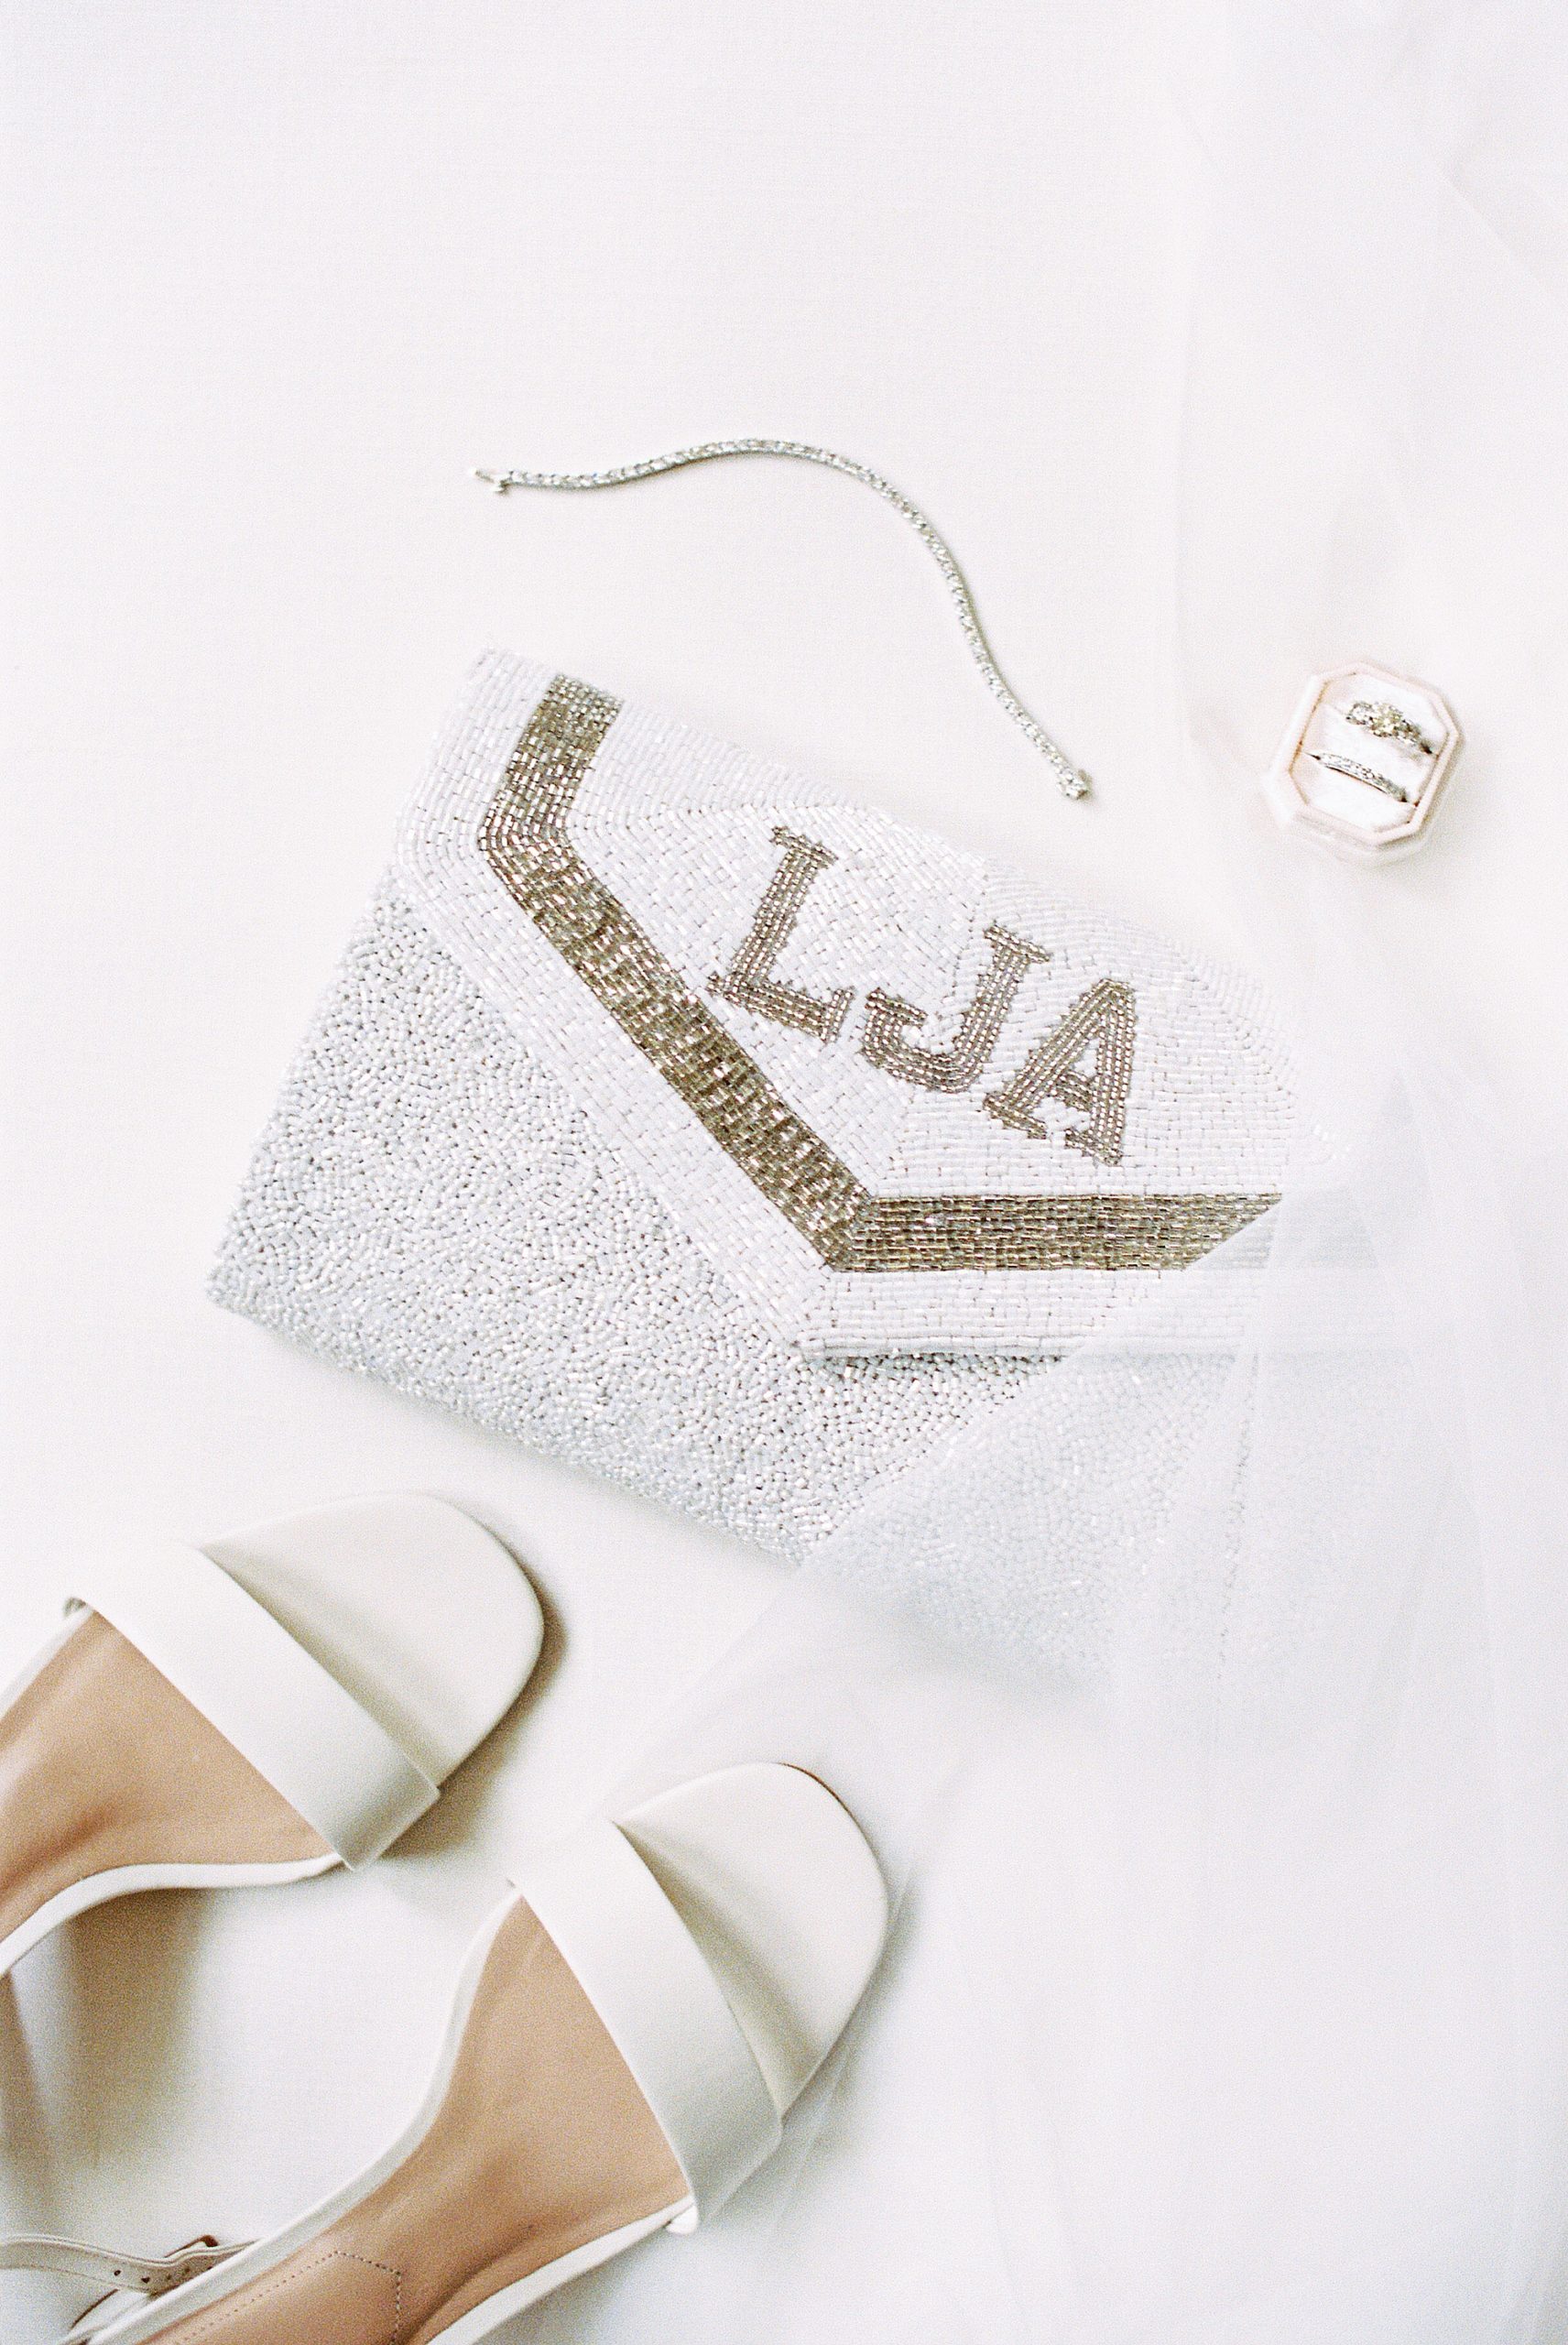 beaded monogrammed bride clutch purse and shoes film photograph